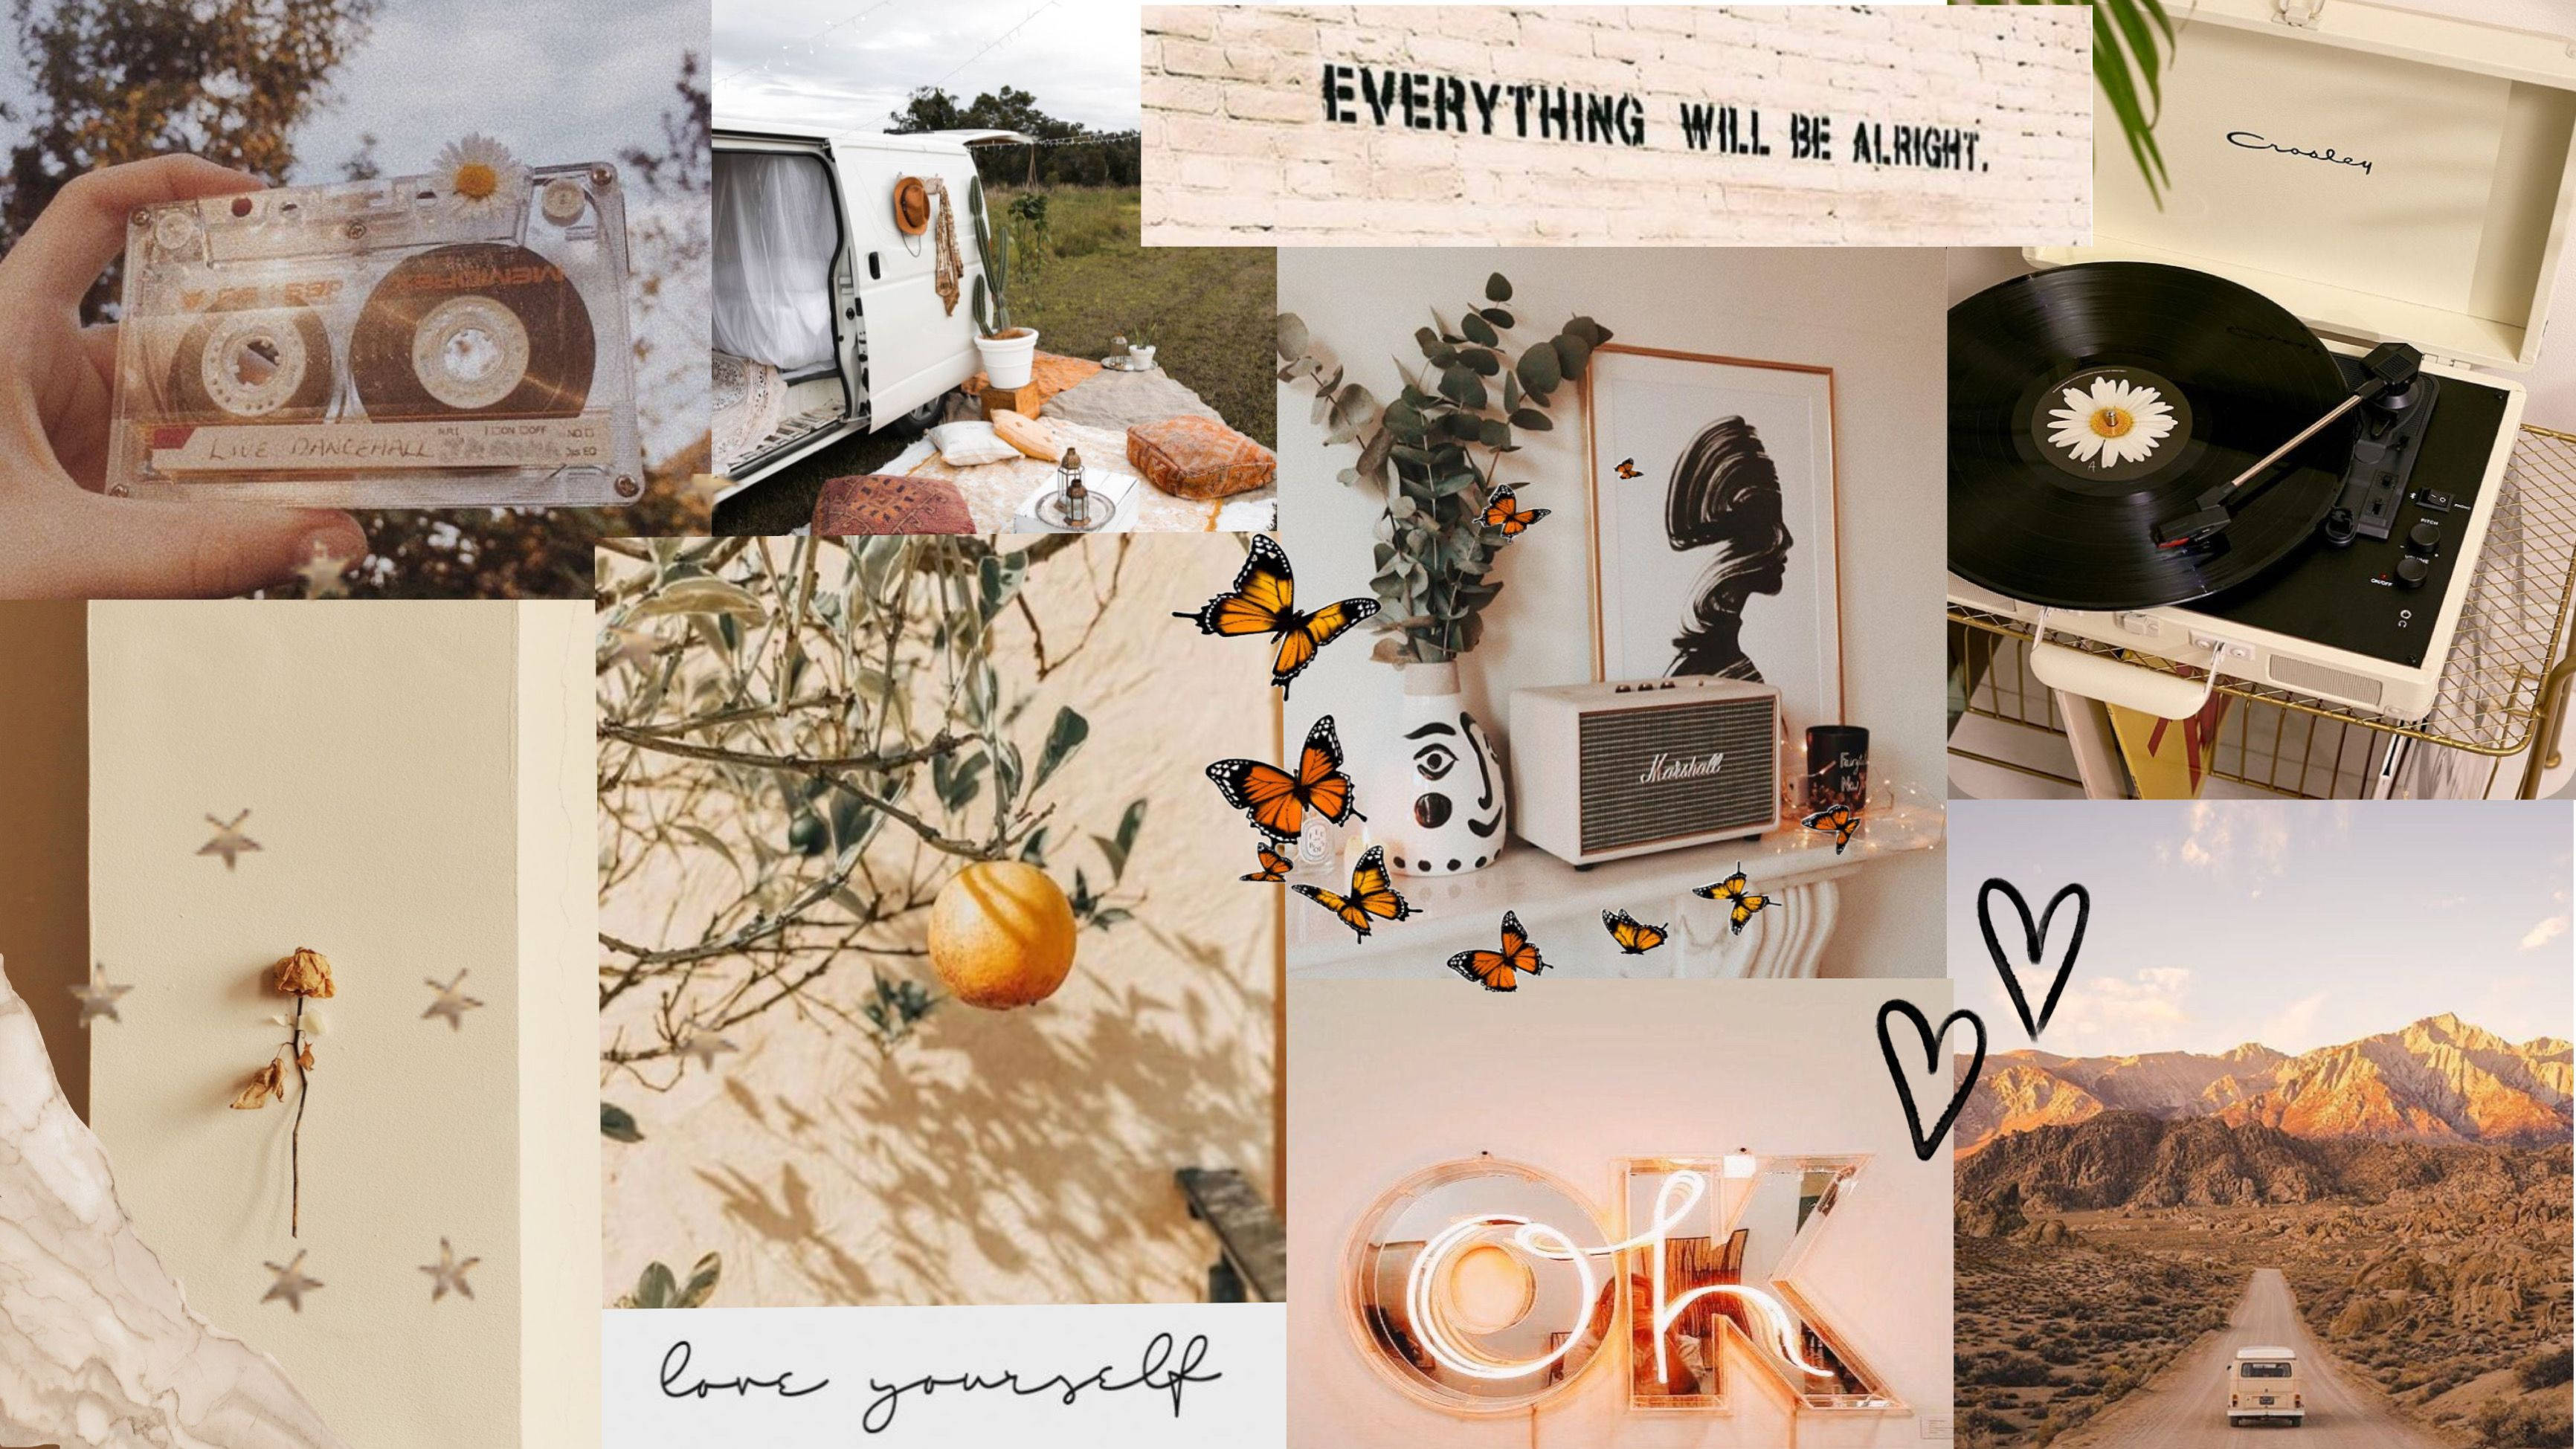 Download Vintage Collage Pinterest Aesthetic With Quotes Wallpaper |  